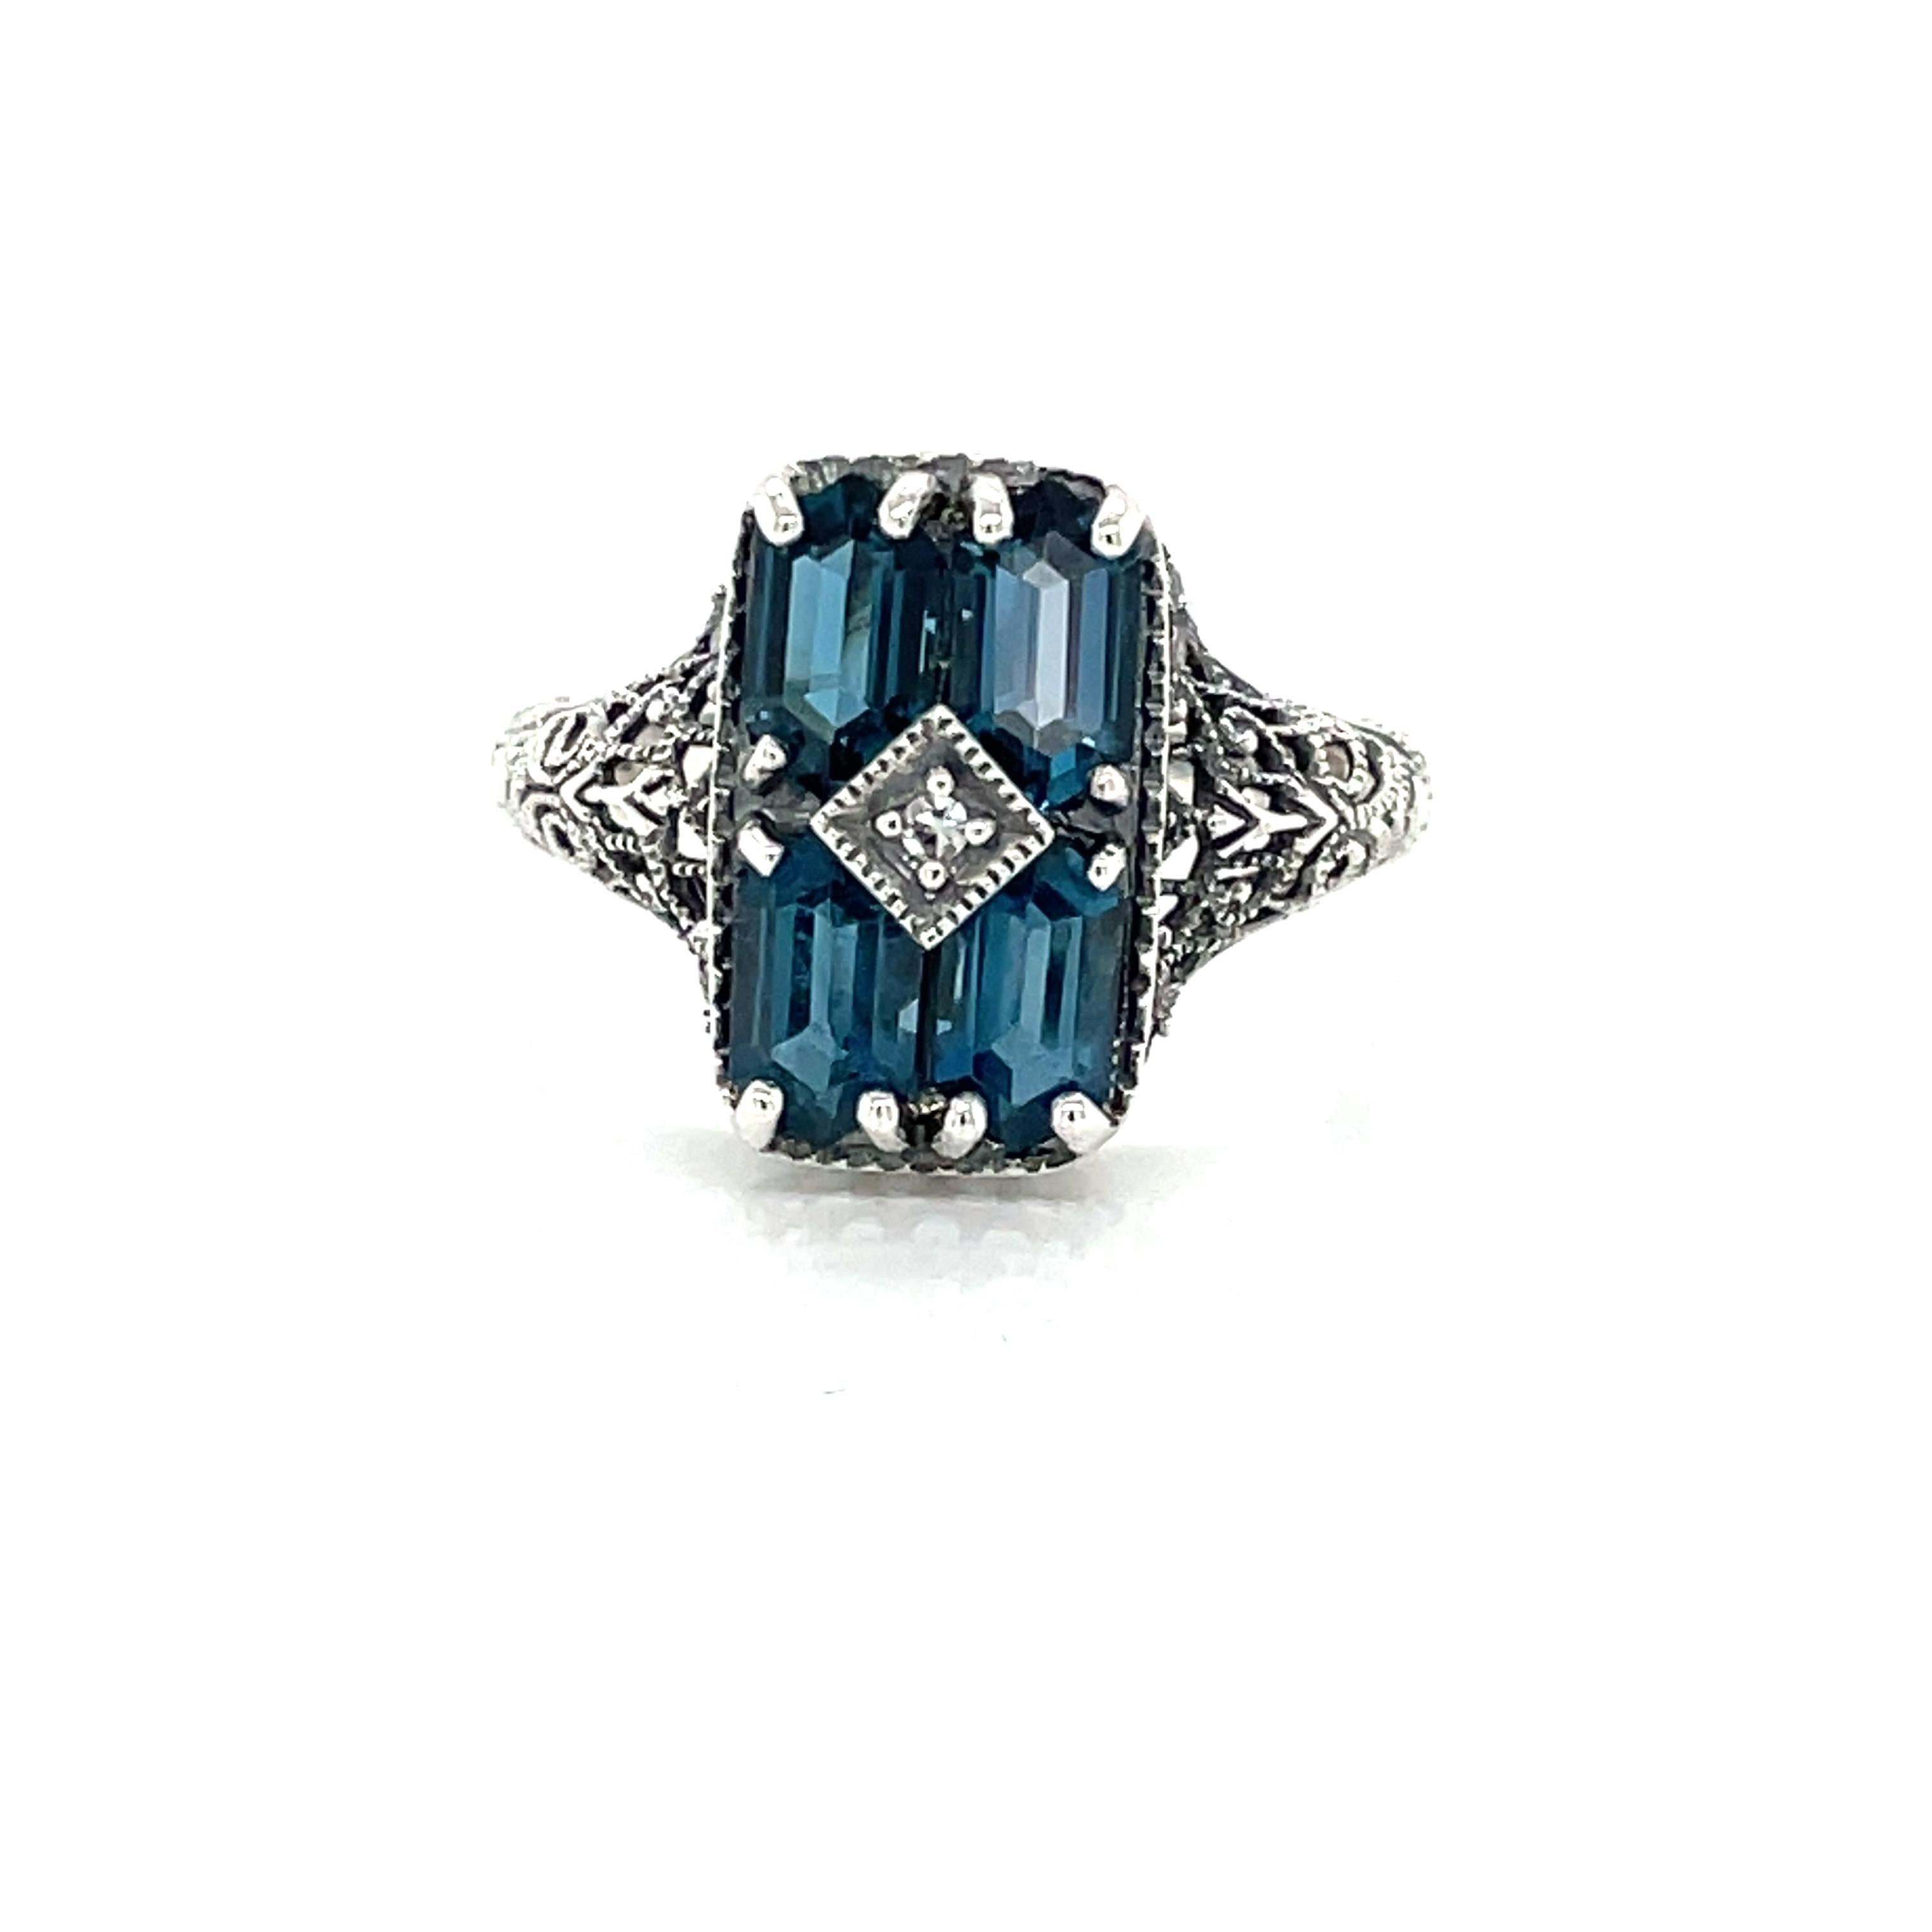 Four faceted hexegon shaped beautiful London Blue Topaz grace the front of this antique style .925 sterling silver ring.
In size 7. New and presented in a miniature antique style gift box.  